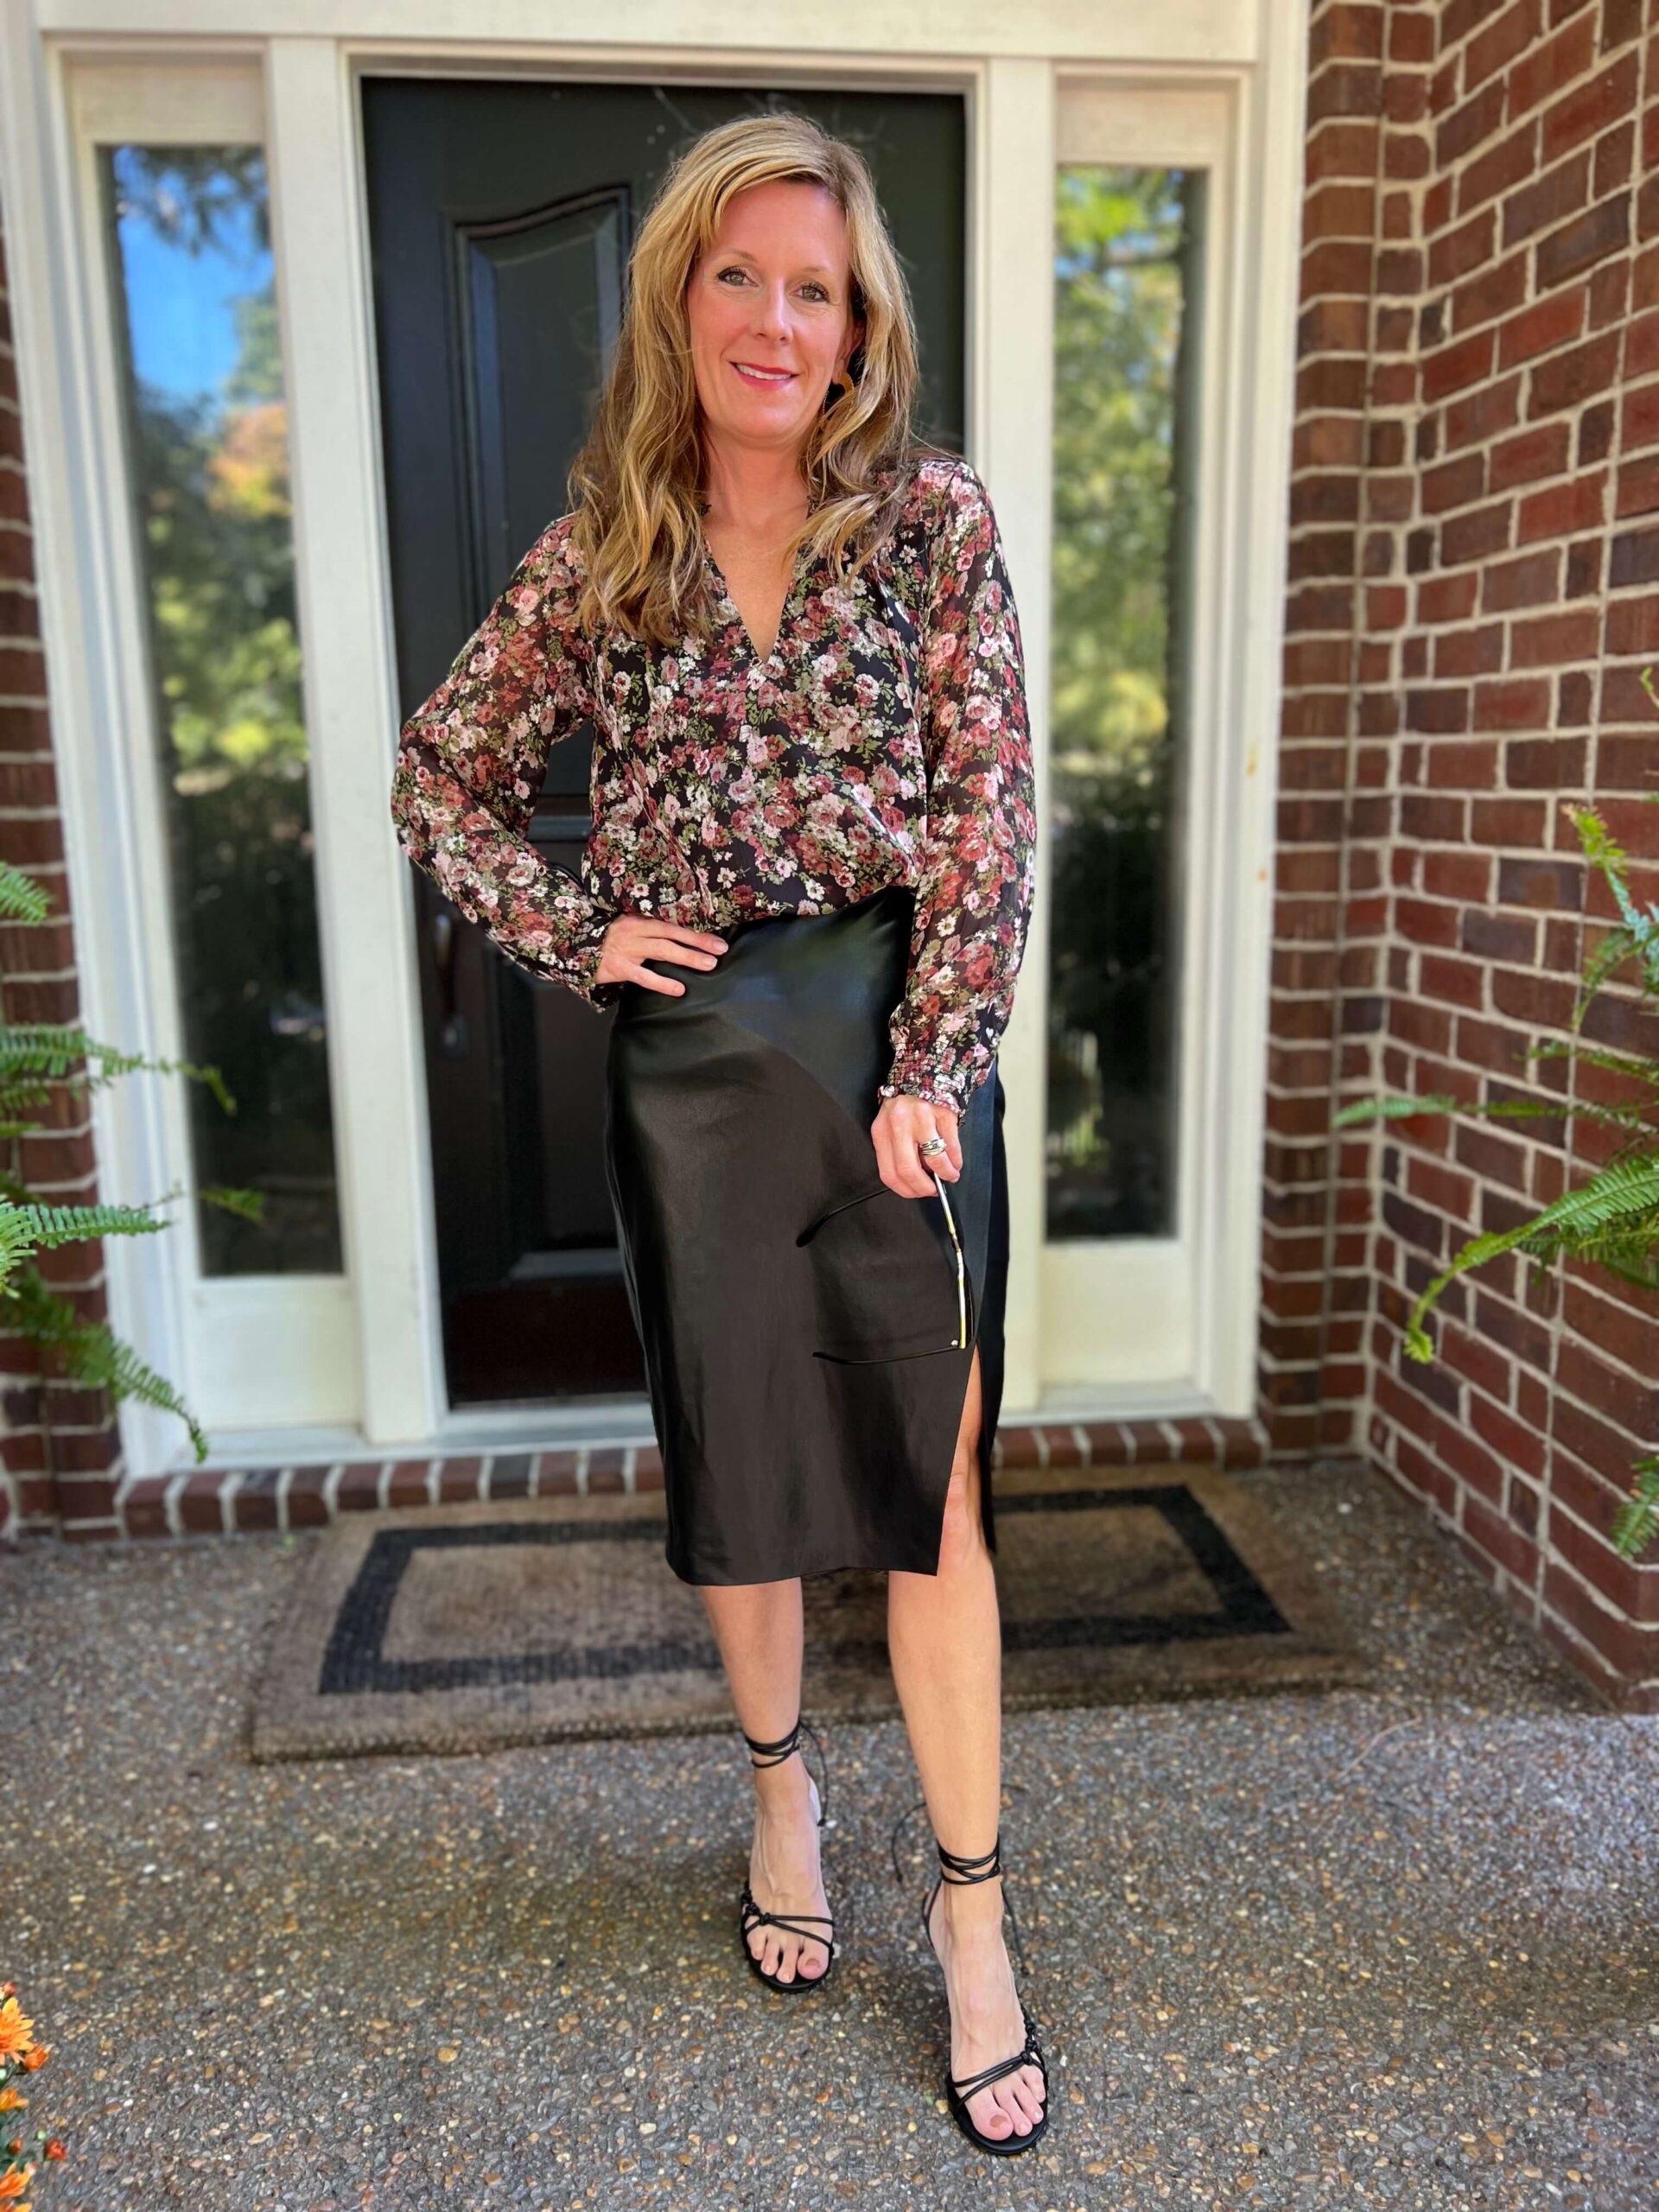 Fall Capsule Wardrobe Styled Looks - Part 2 floral blouse and midi skirt how to wear a faux leather skirt how to style faux leather date night look what to wear for a night out with the girls affordable dressy sandals affordable blouse for fall